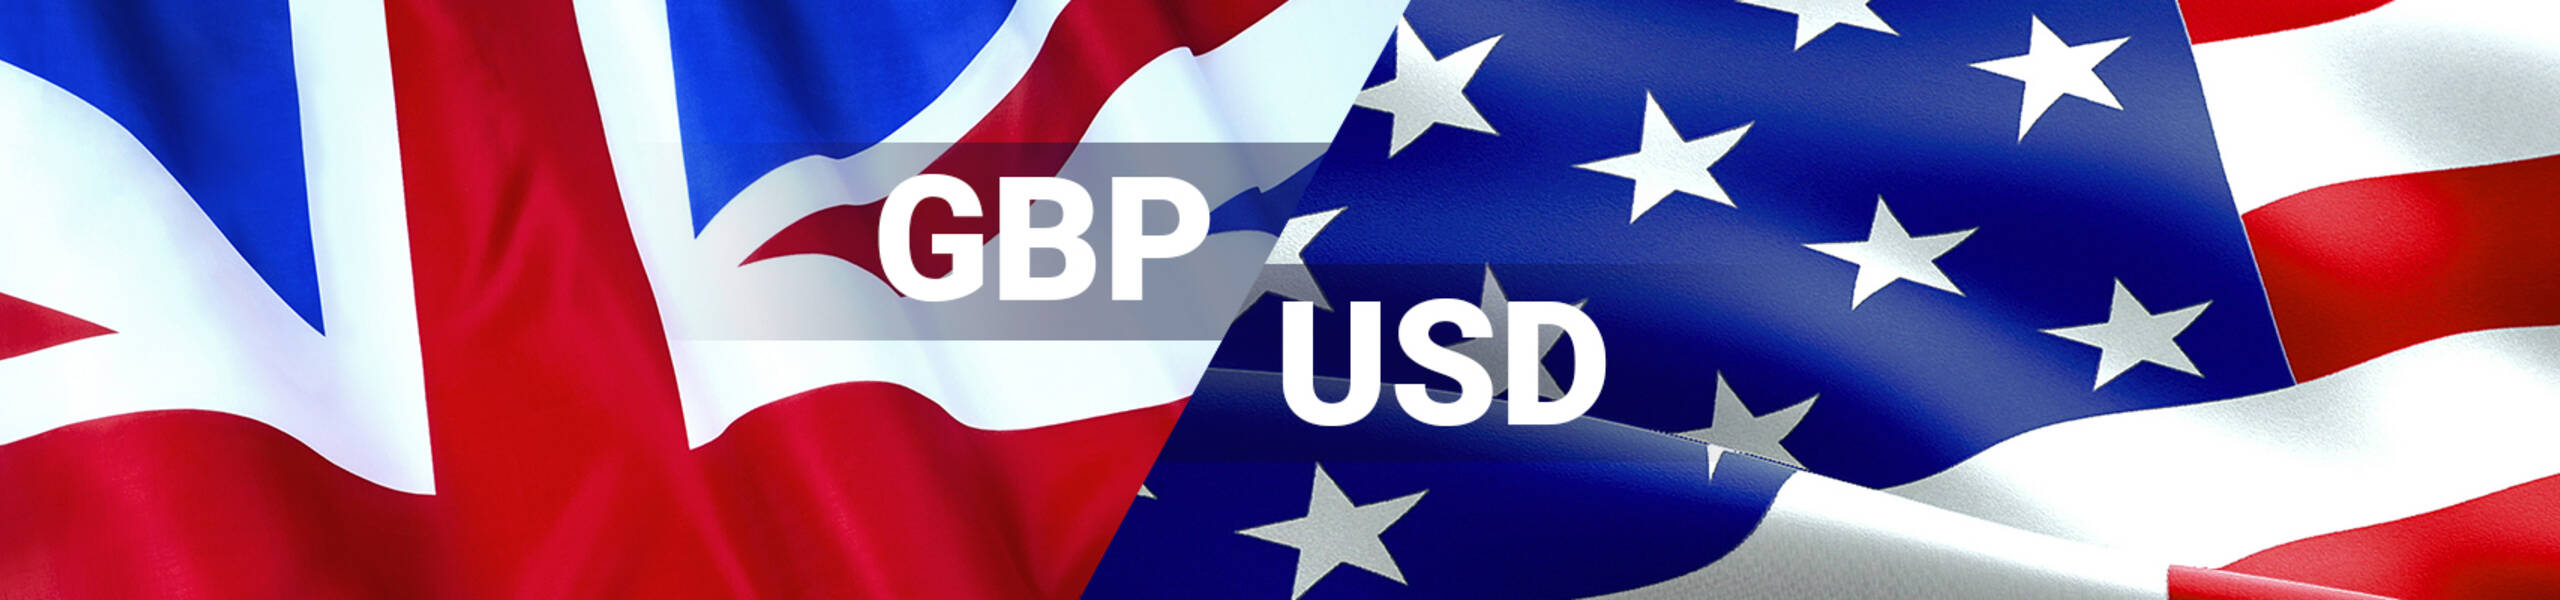 GBP/USD looking to extend the rebound